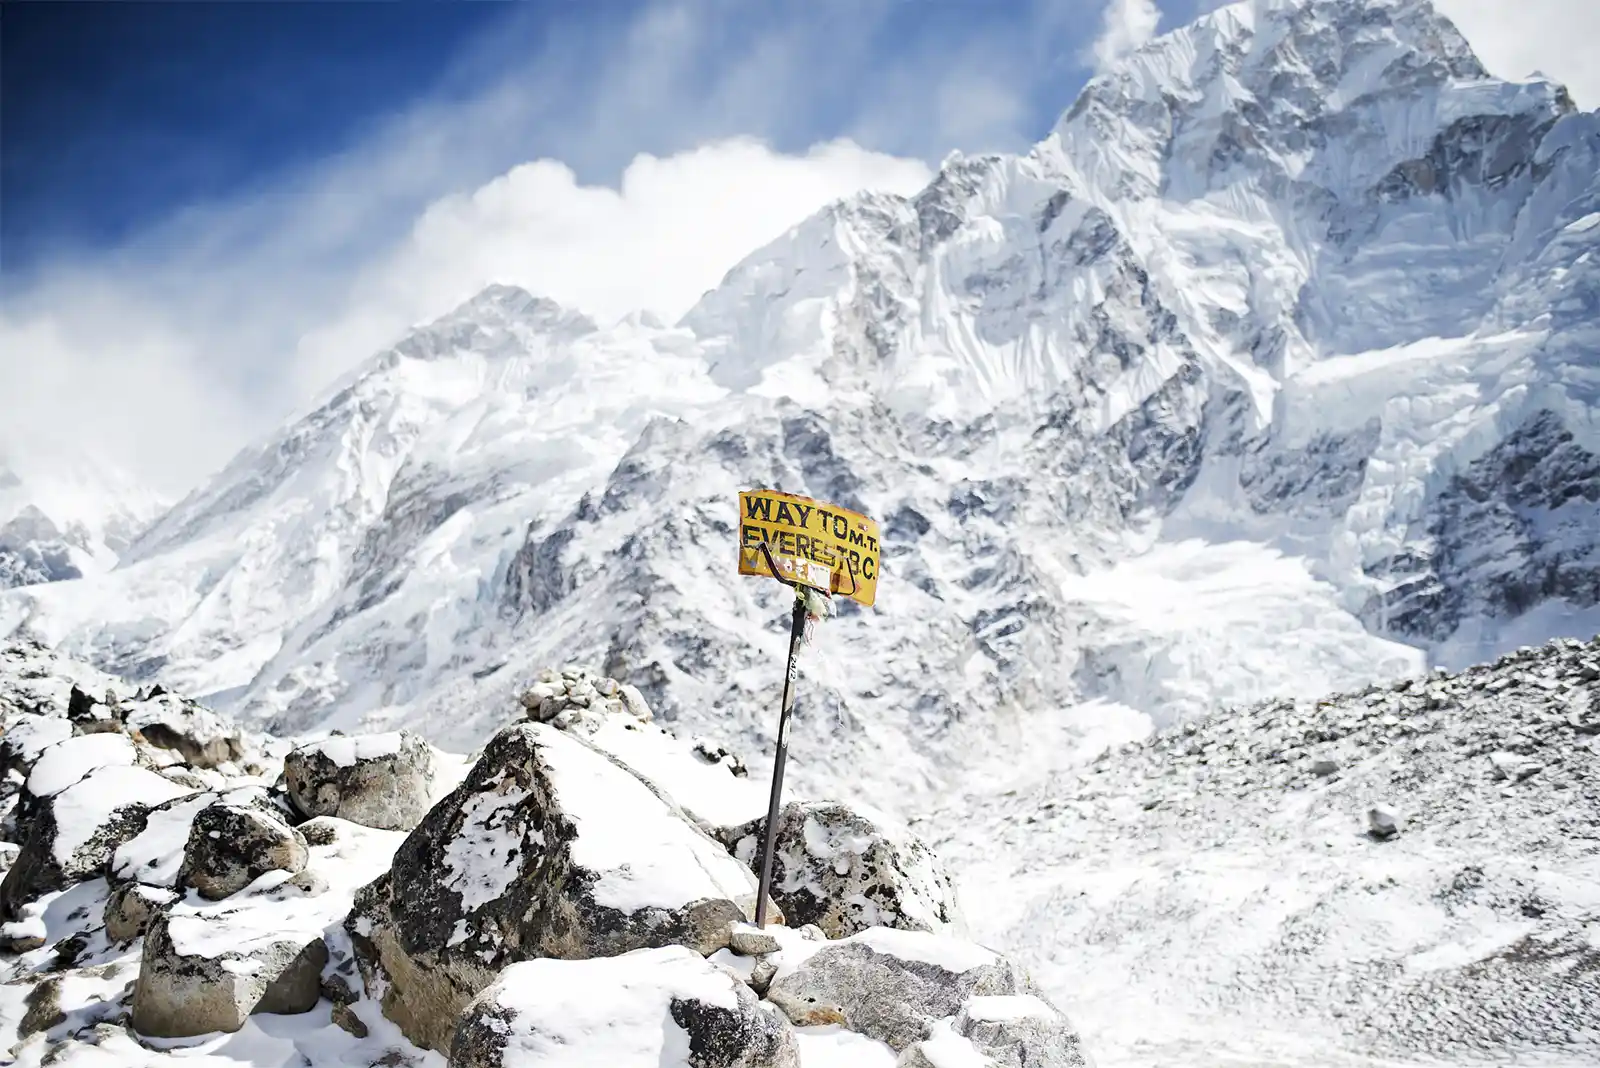 way to Everest base camp